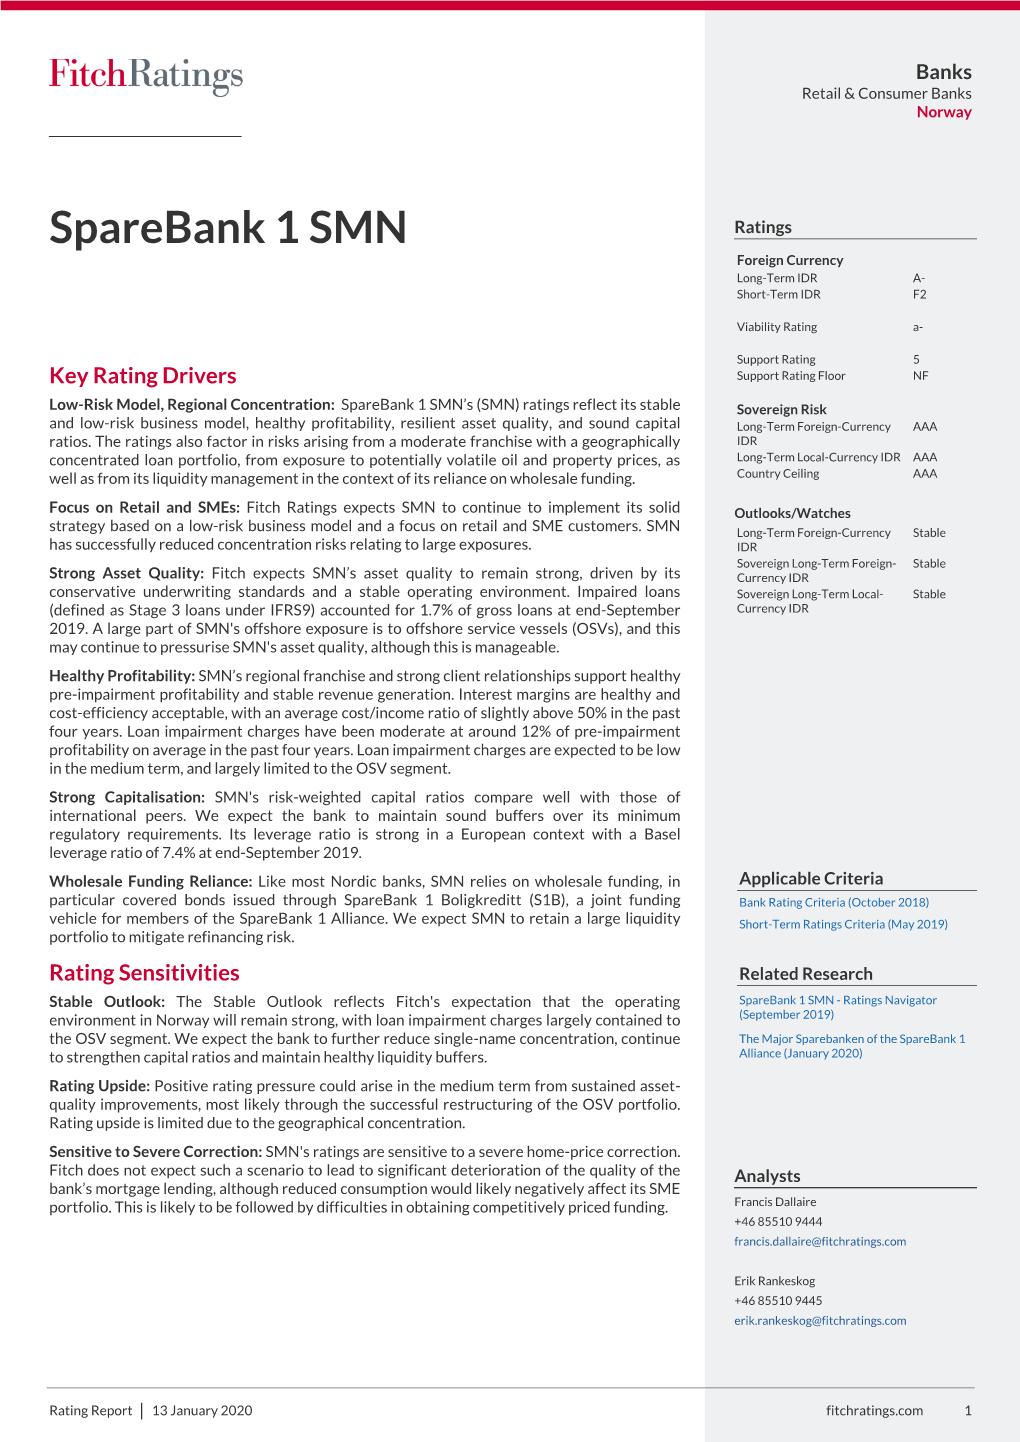 Sparebank 1 SMN Ratings Foreign Currency Long-Term IDR A- Short-Term IDR F2